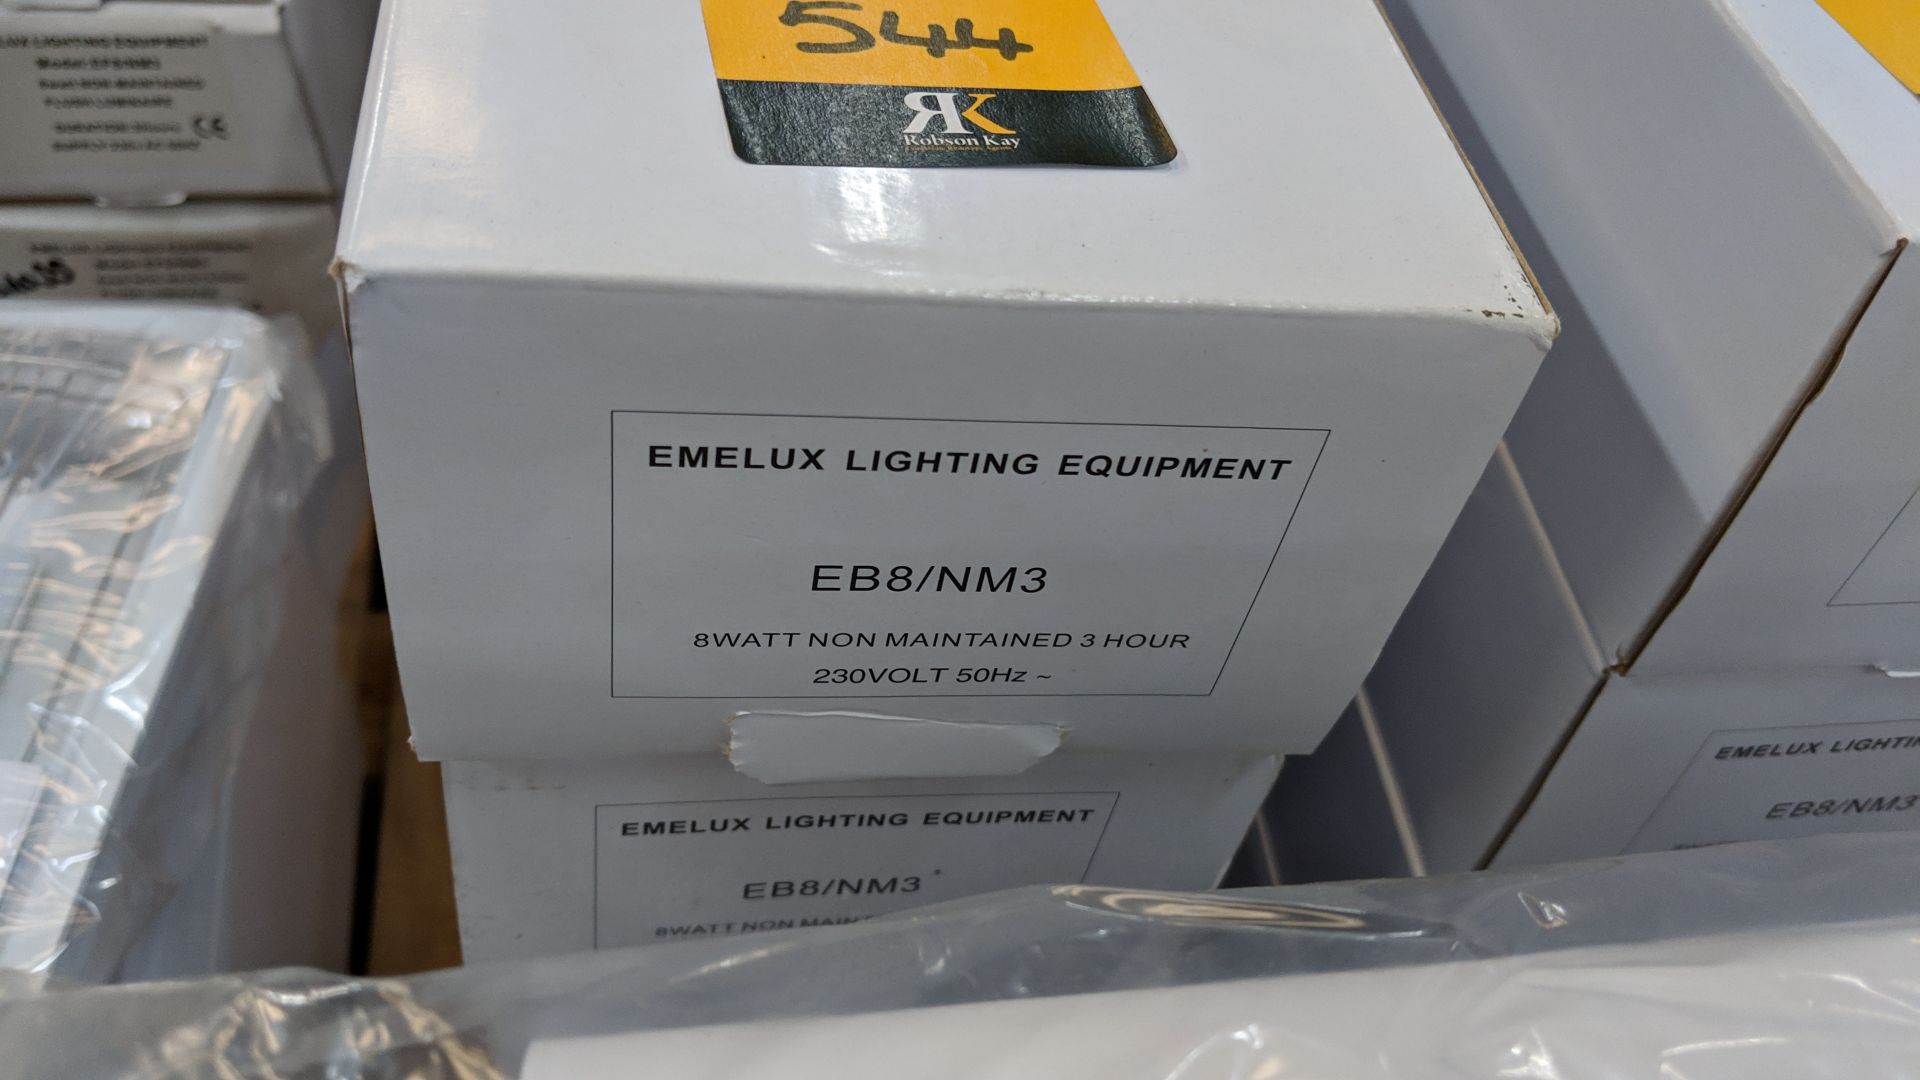 6 off emergency lighting 8W non-maintained 3 hour lighting units This lot is one of a number of lots - Image 2 of 2